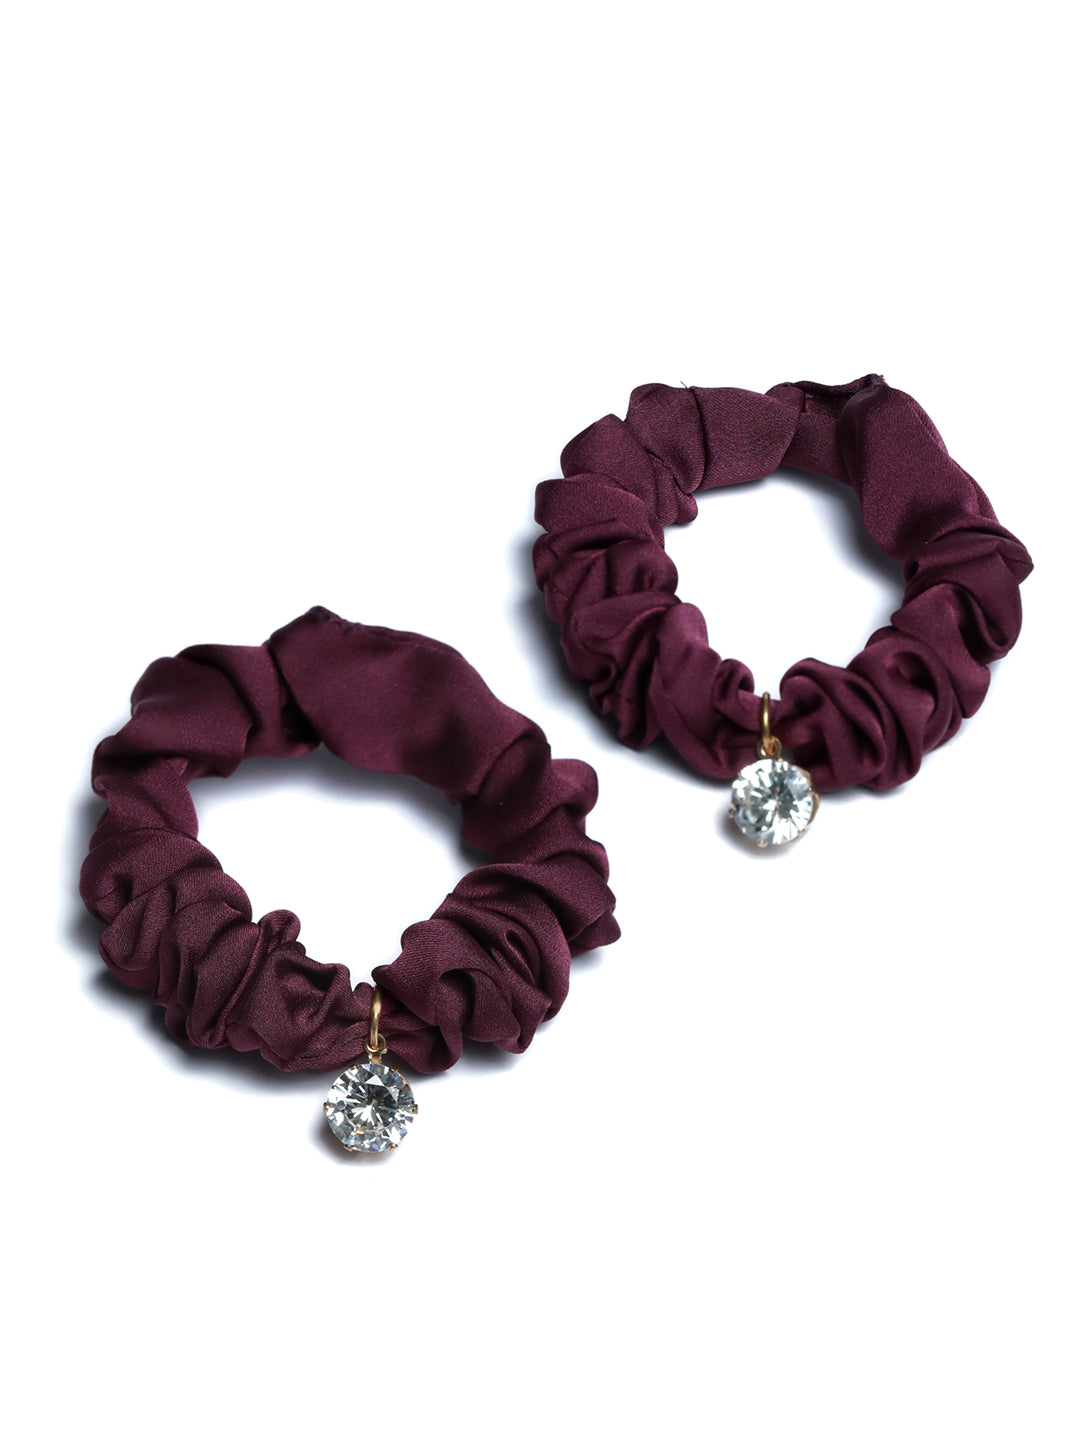 Stone Studded Magenta Hair Ties Pack of 2